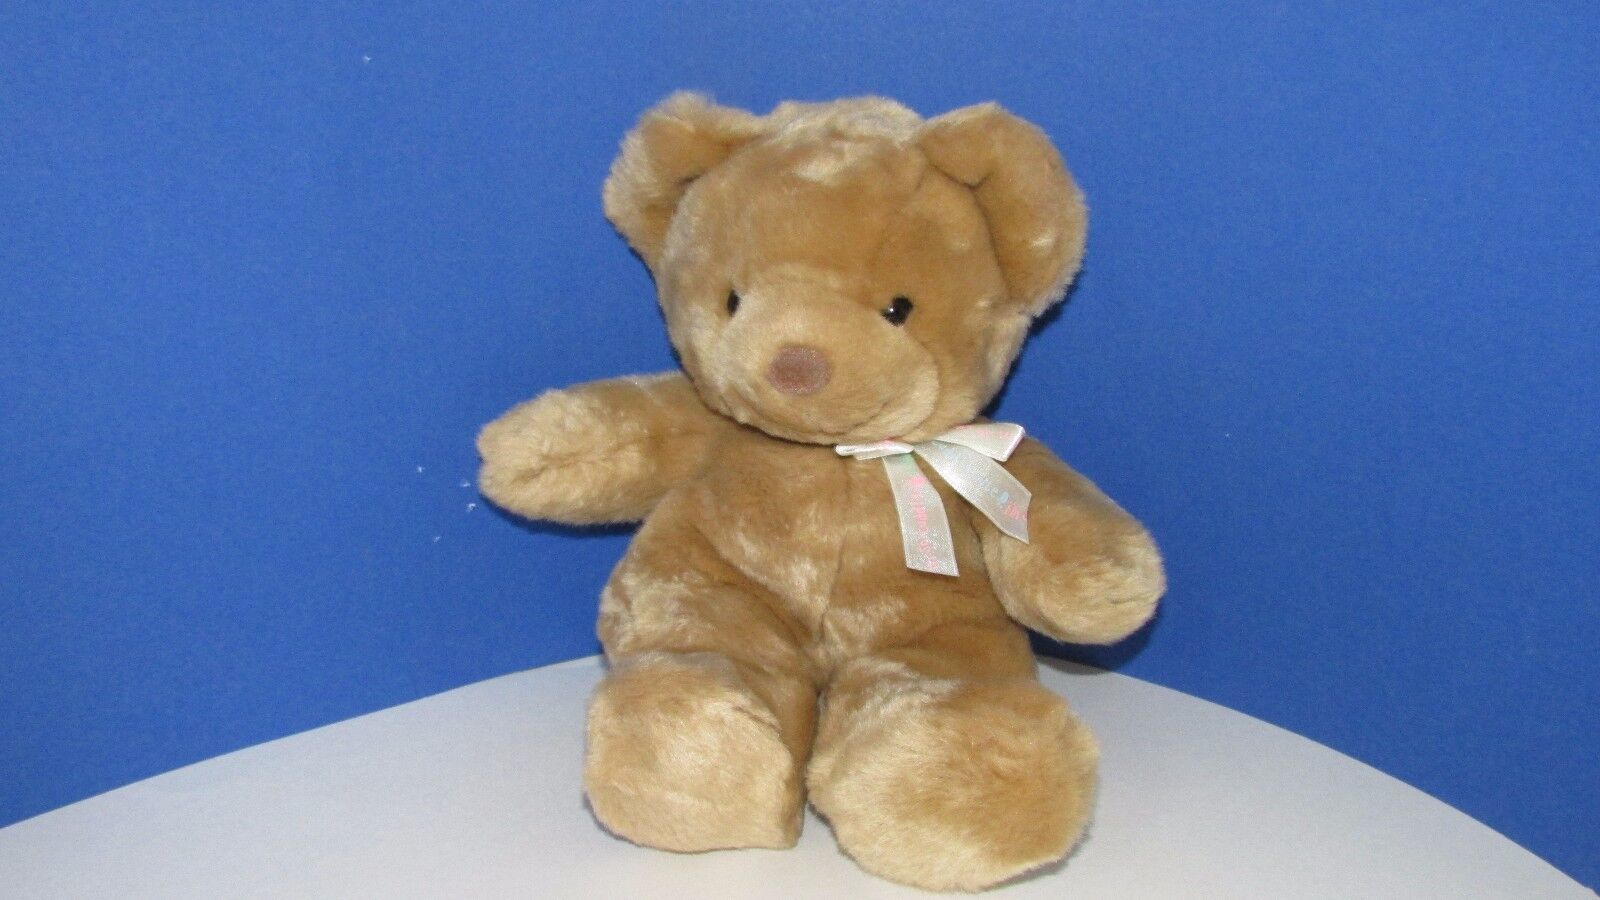 Carters Tykes baby brown bear plush toy I'm so cuddly cute neck ribbon bow - $7.27